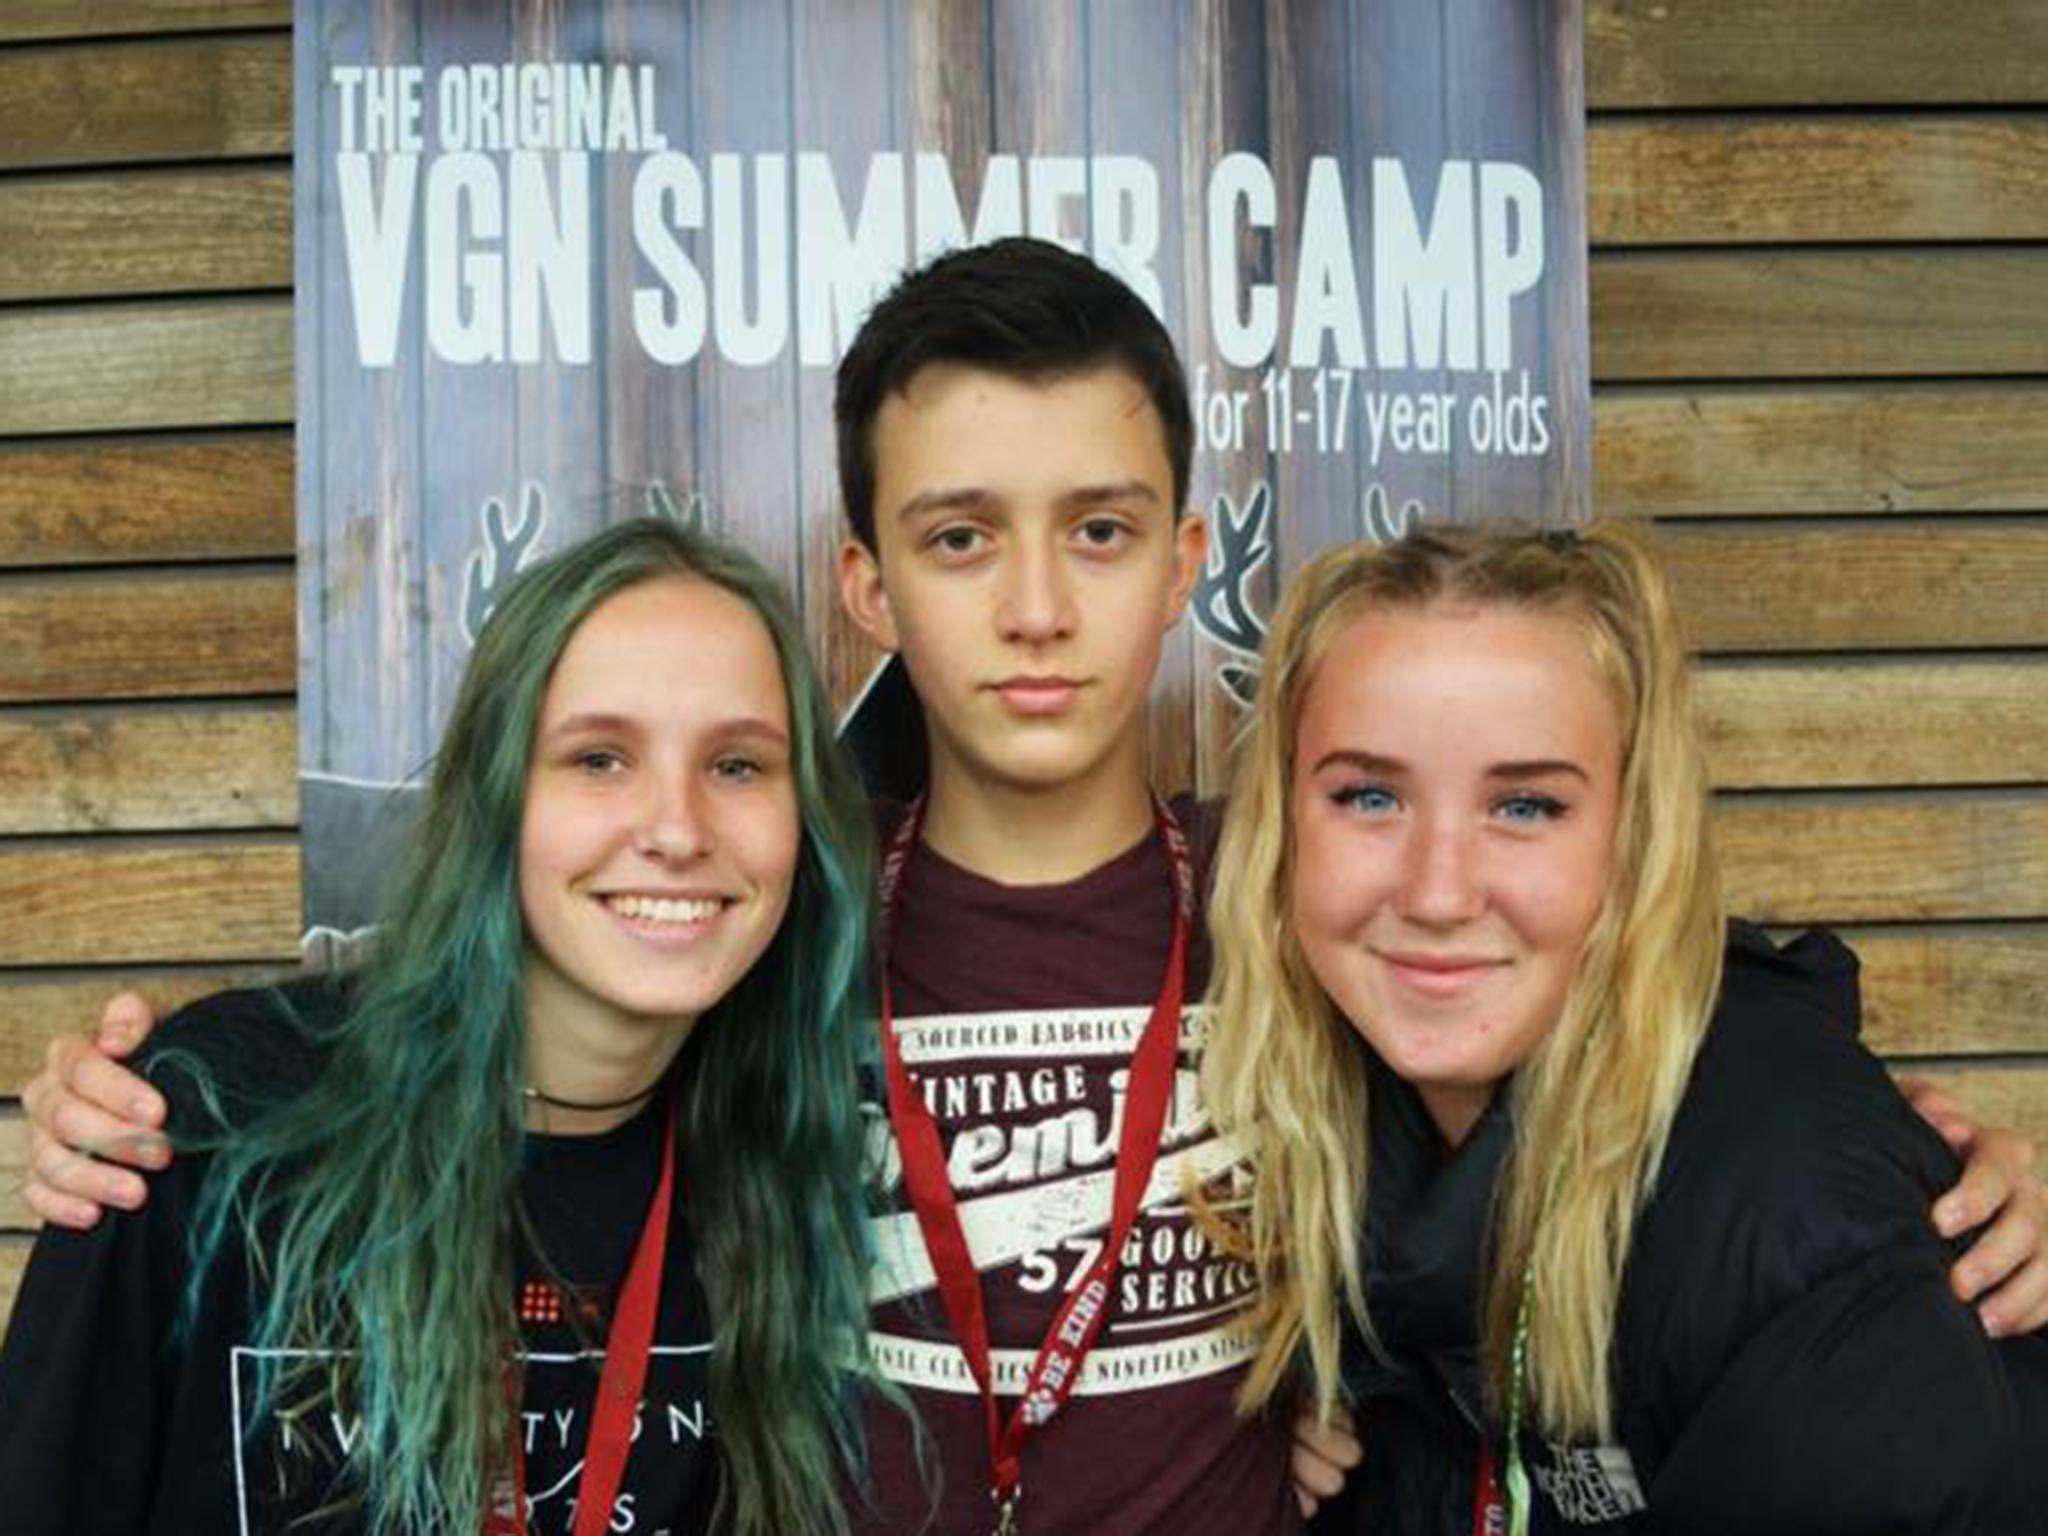 The group runs a summer camp for young vegans